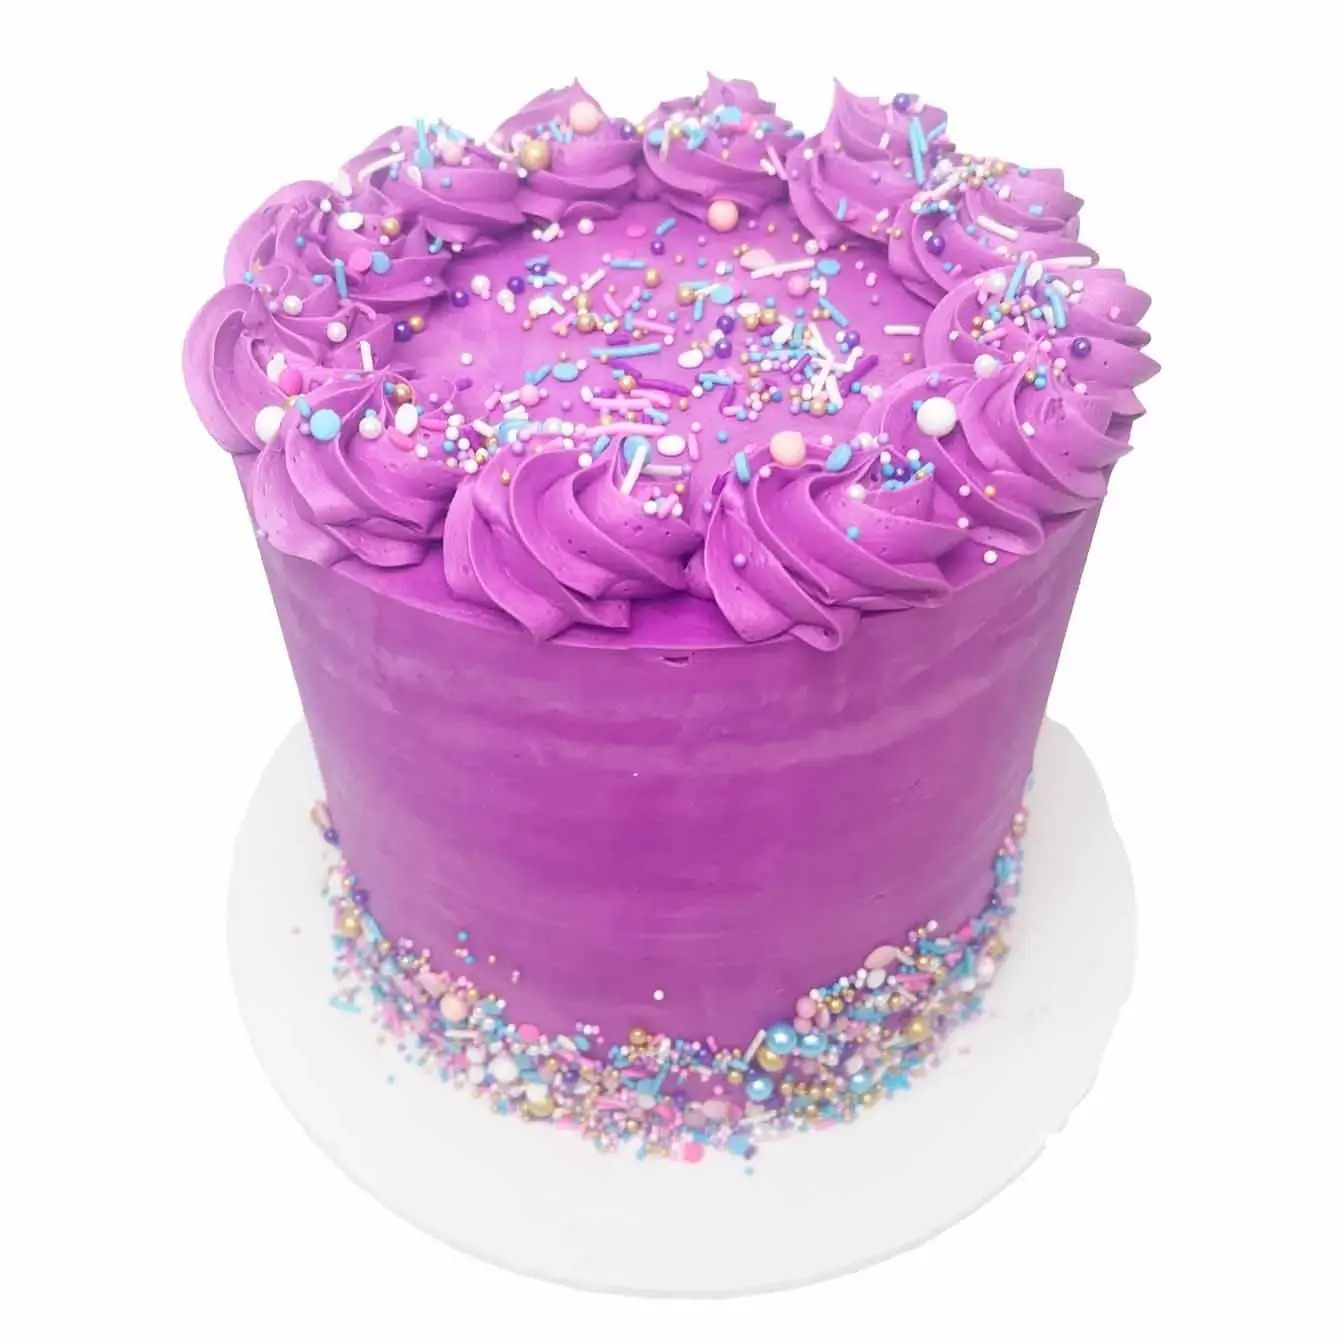 Purple Elegance Celebration Cake - A purple cake with intricate purple piping and sprinkles, a charming and vibrant centerpiece for birthdays, anniversaries, and celebrations with a touch of royal sophistication.